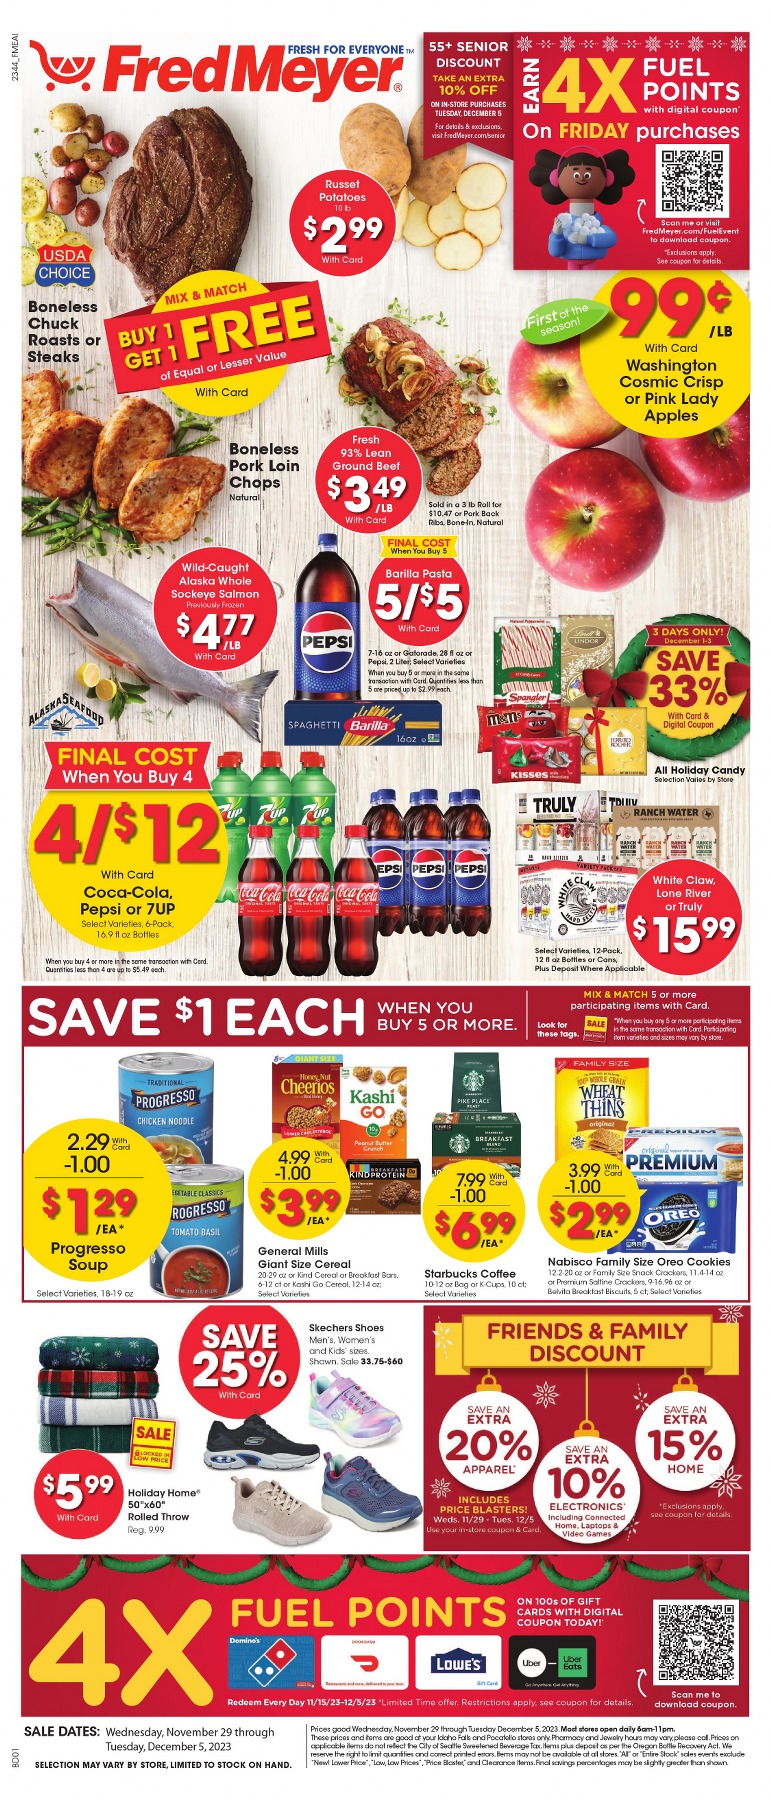 Fred Meyer Weekly Ad November 29 to December 5, 2023 1 – fred meyer ad 1 2